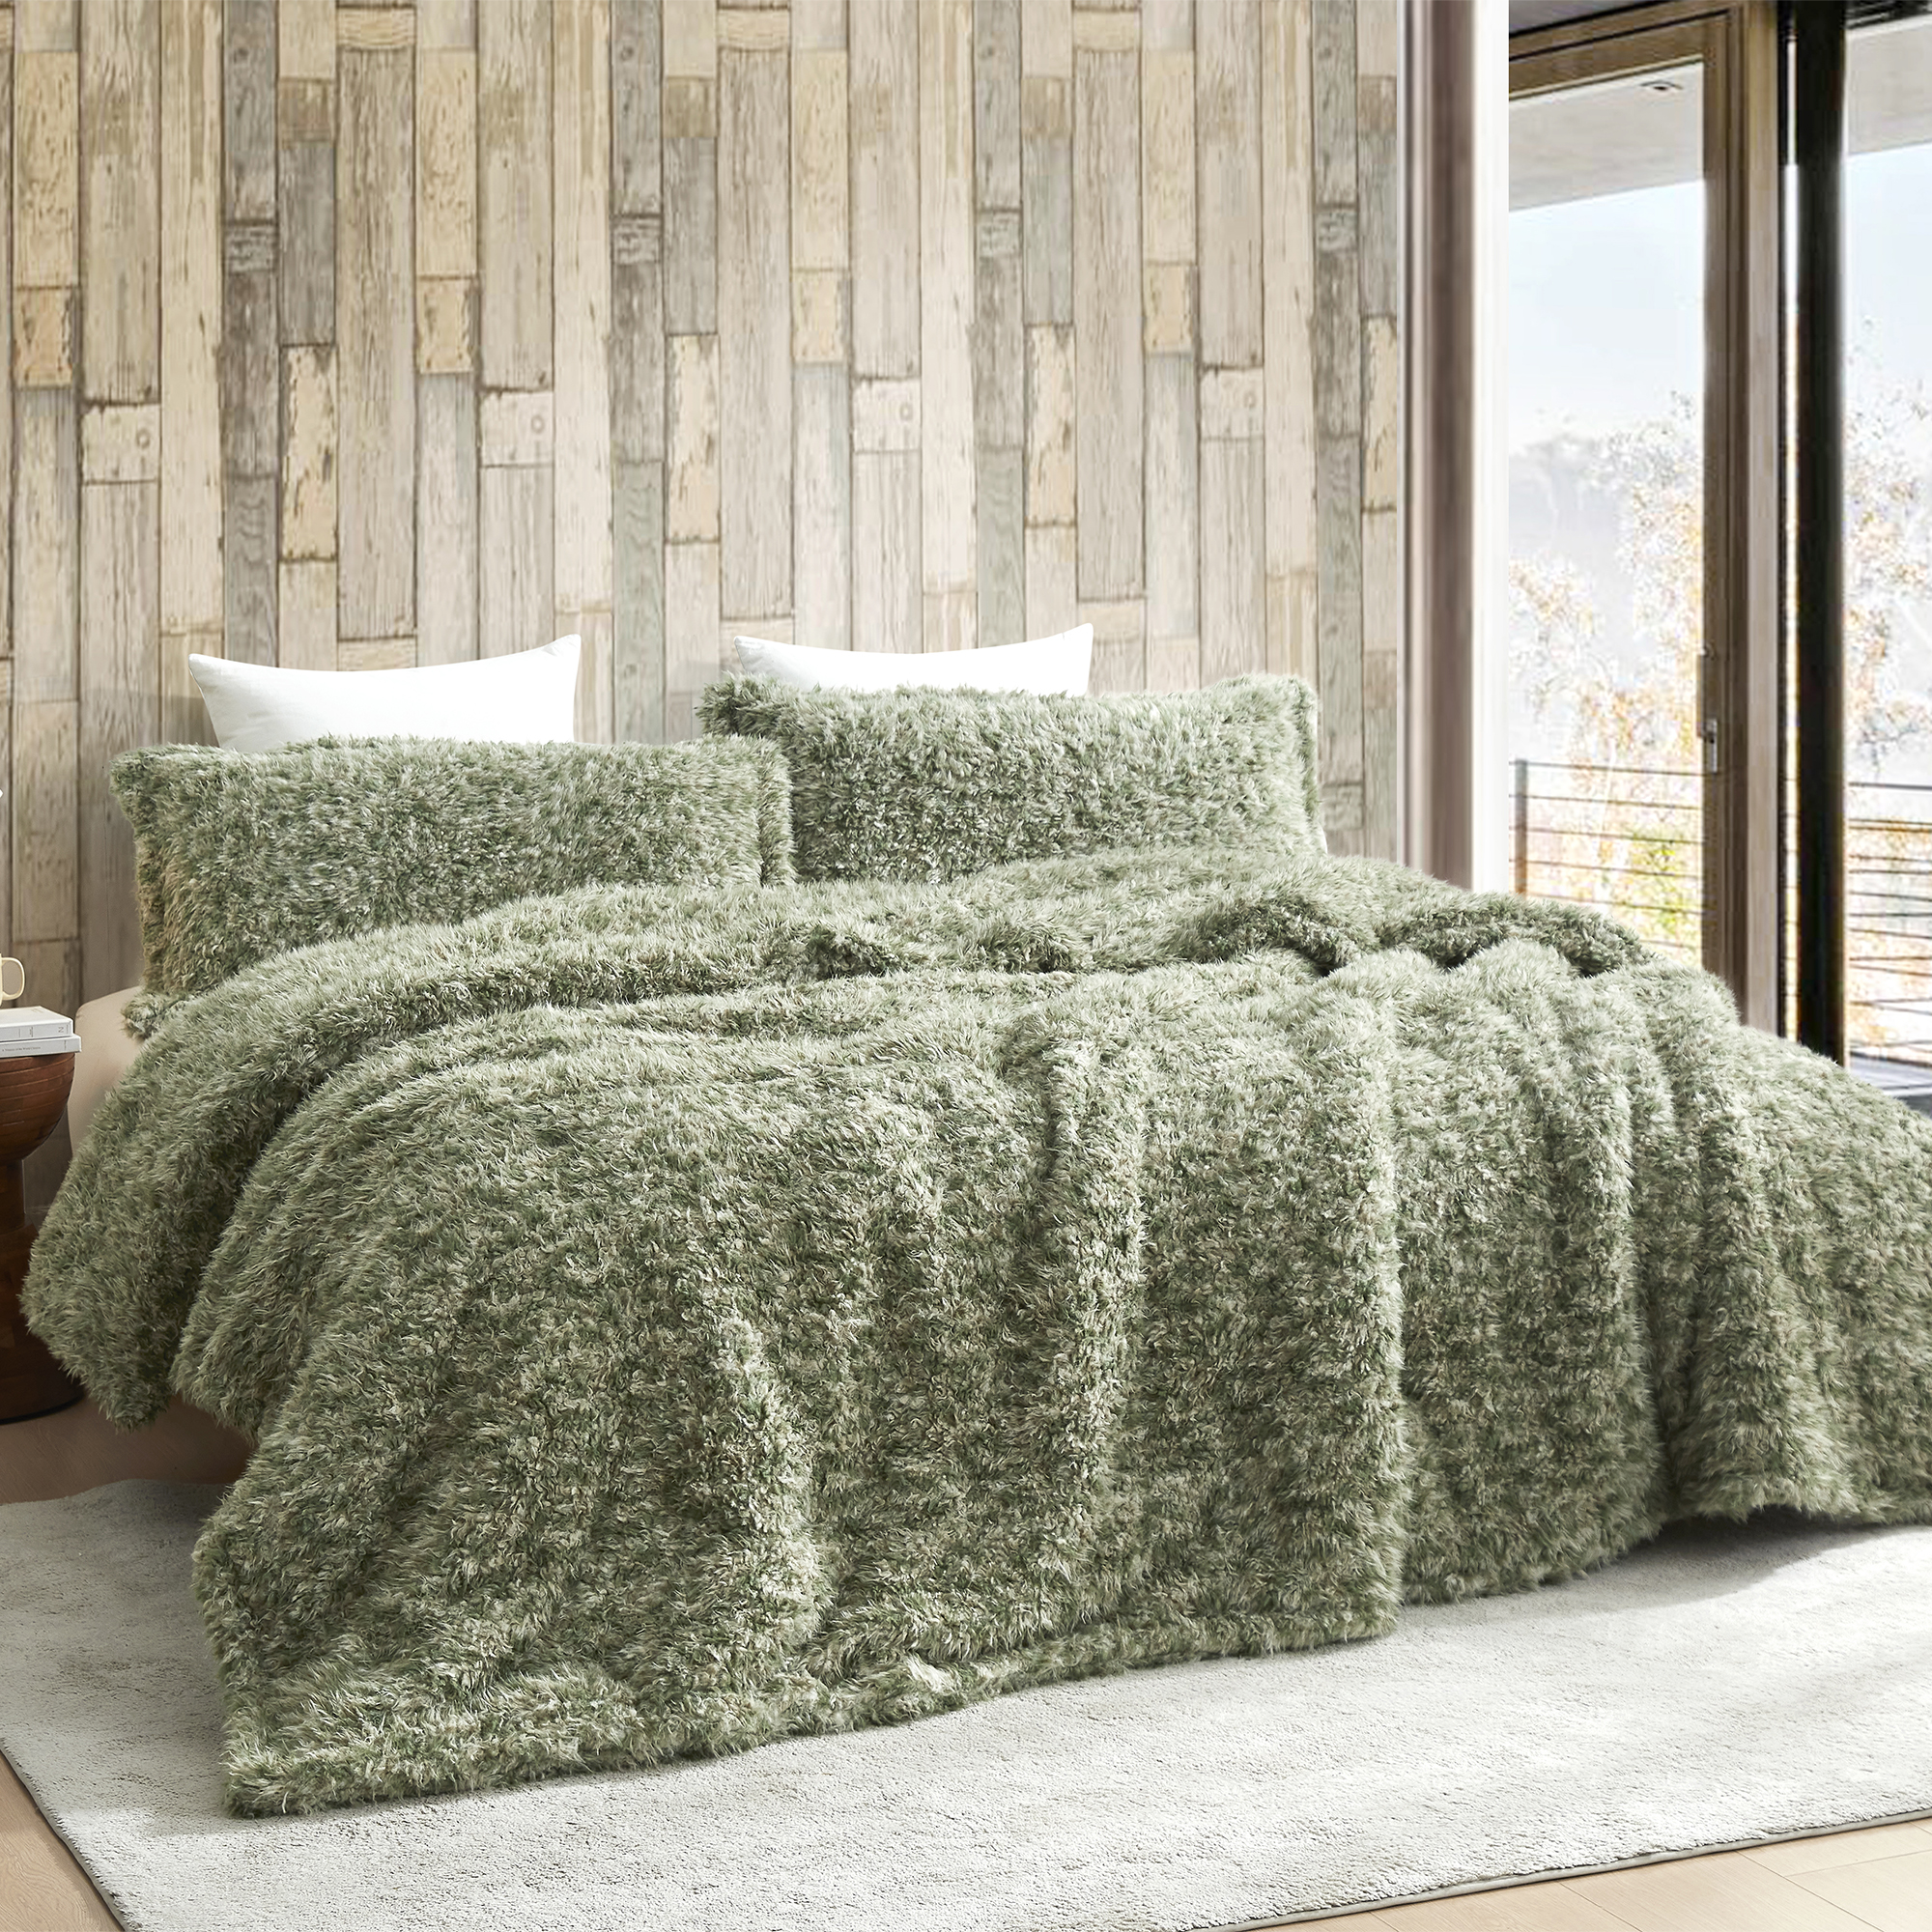 Sir Yes Sir - Coma Inducer® Oversized Queen Comforter - Combat Green